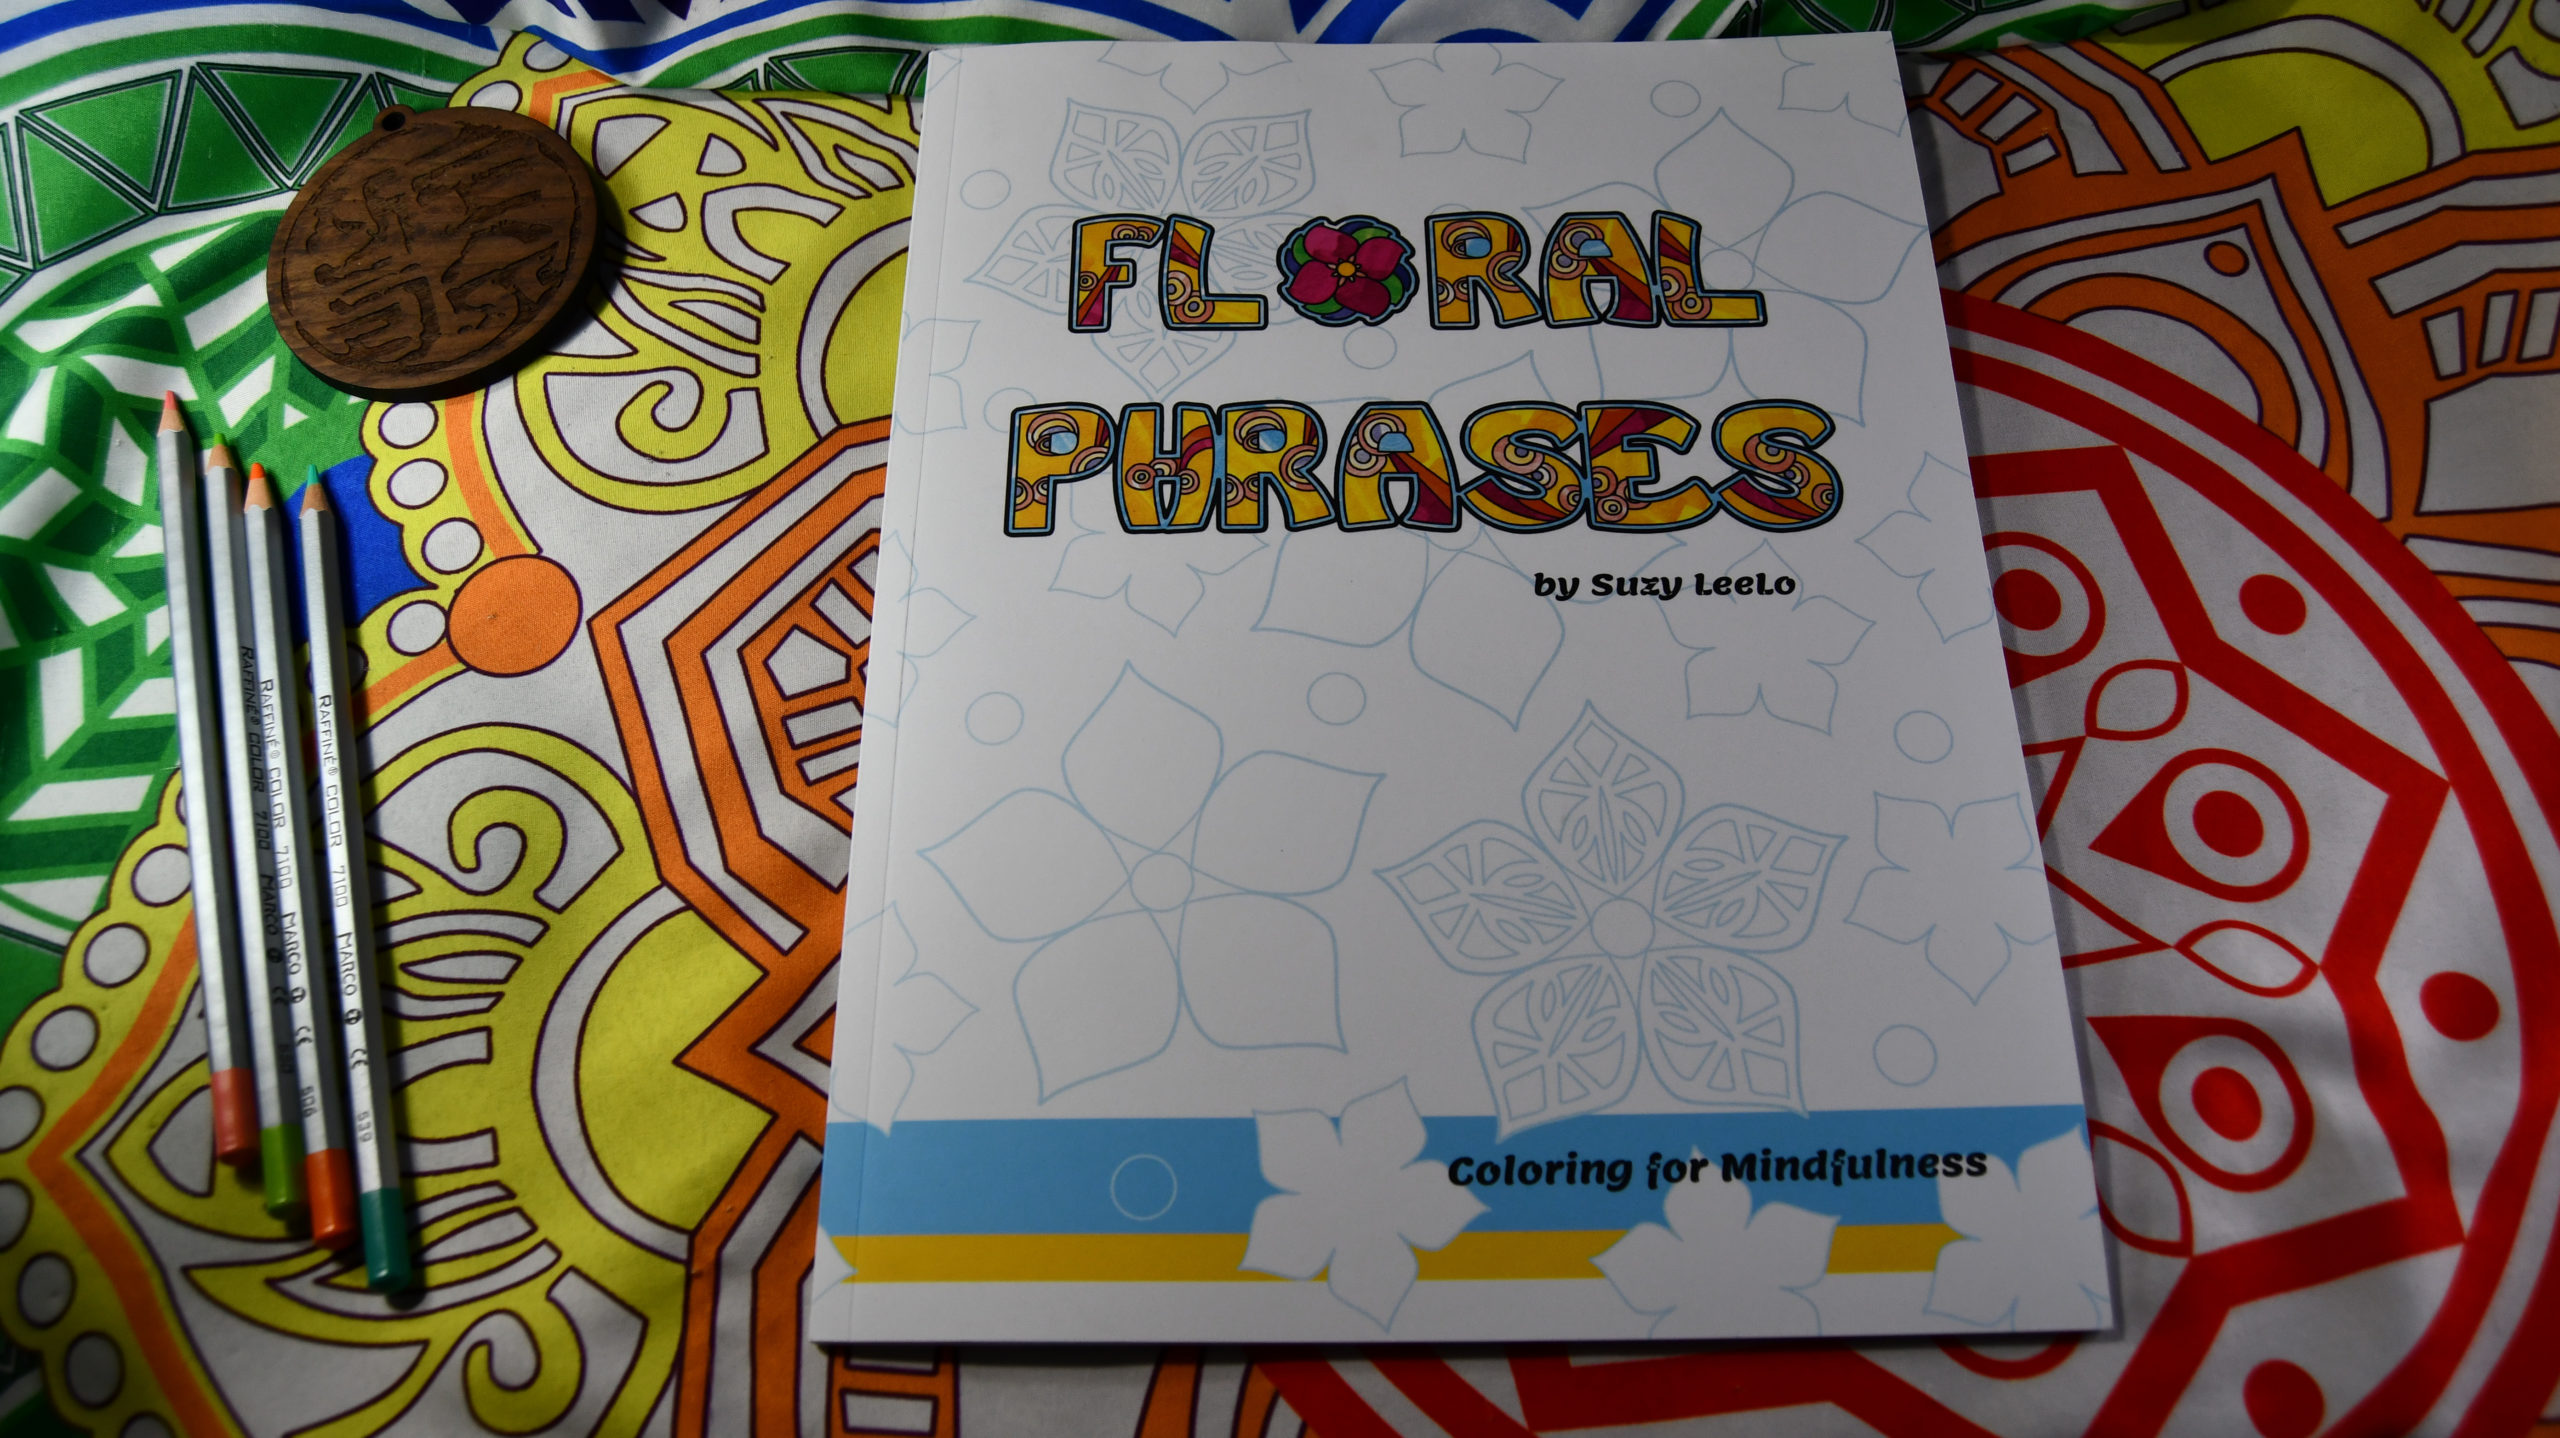 Floral Phrases Book Event – That’s a wrap!